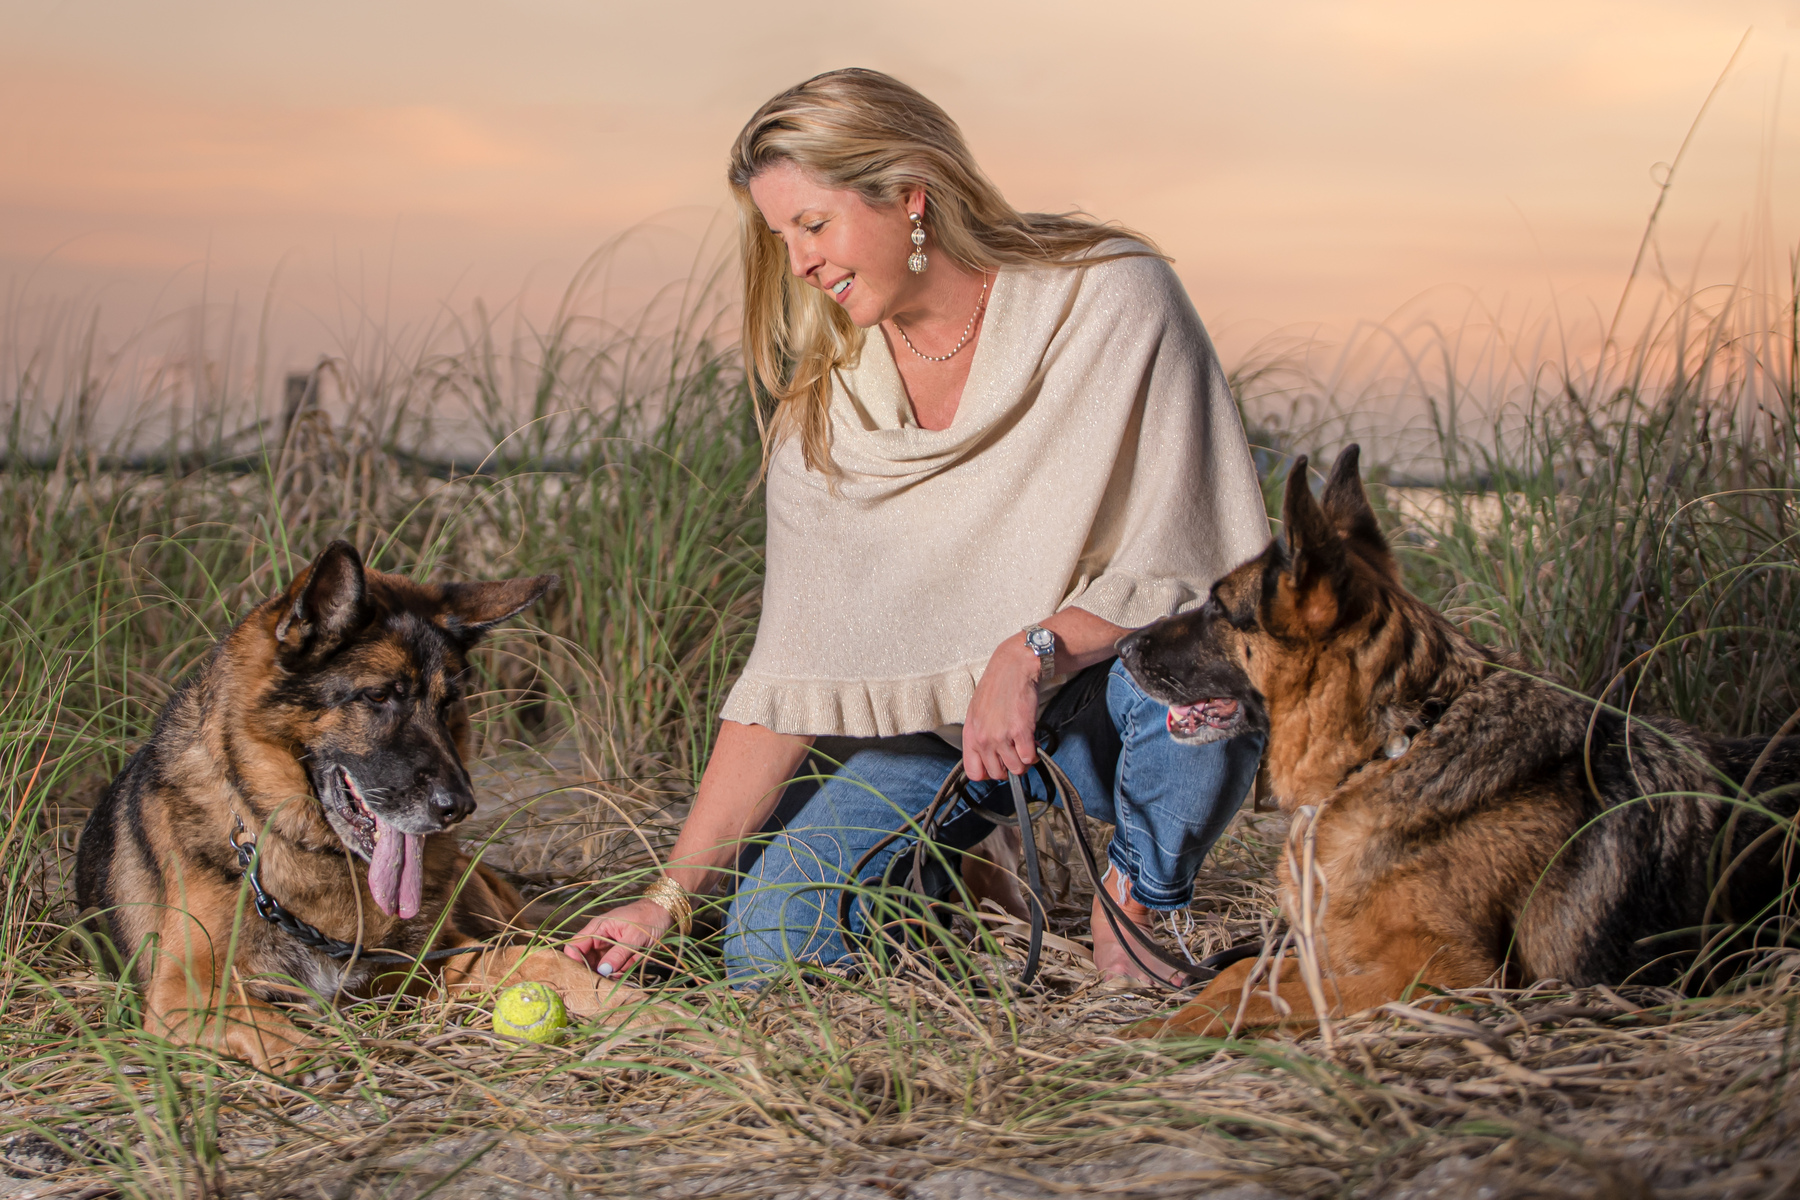 Schedule your portrait session today! Call 561-307-9875, Beach Pet Family Photos